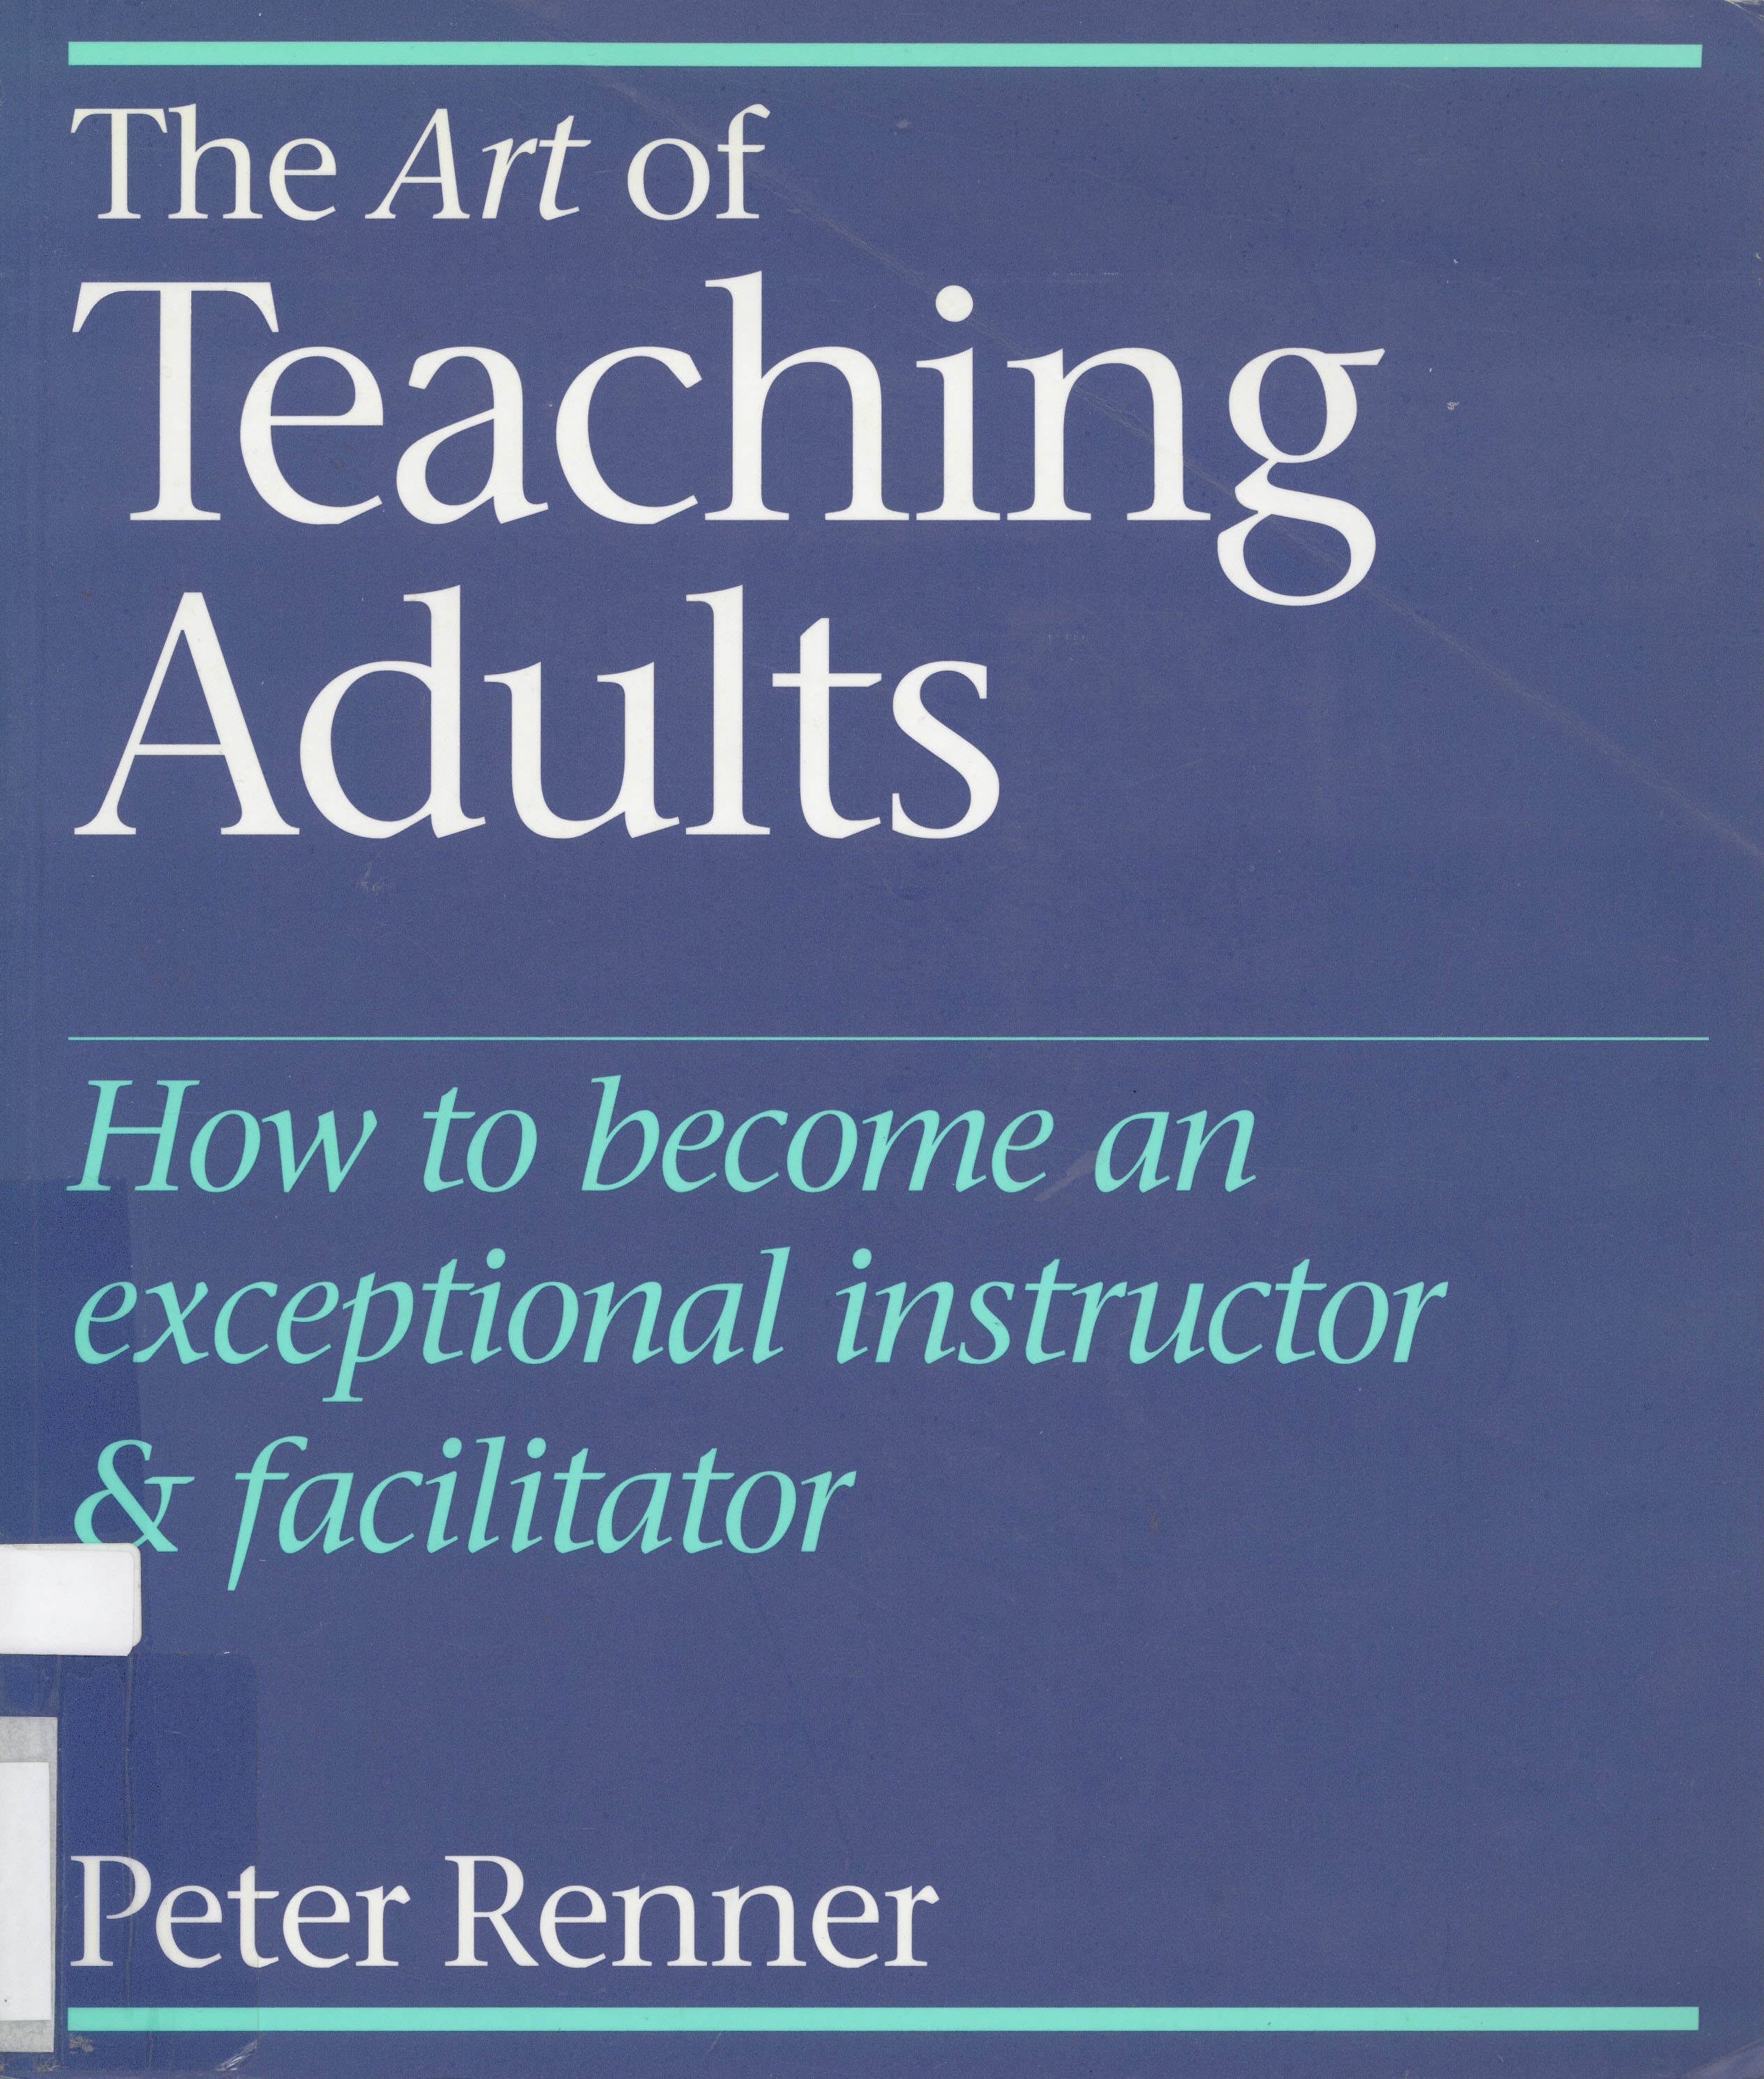 The art of teaching adults : how to become an exceptional instructor & facilitator